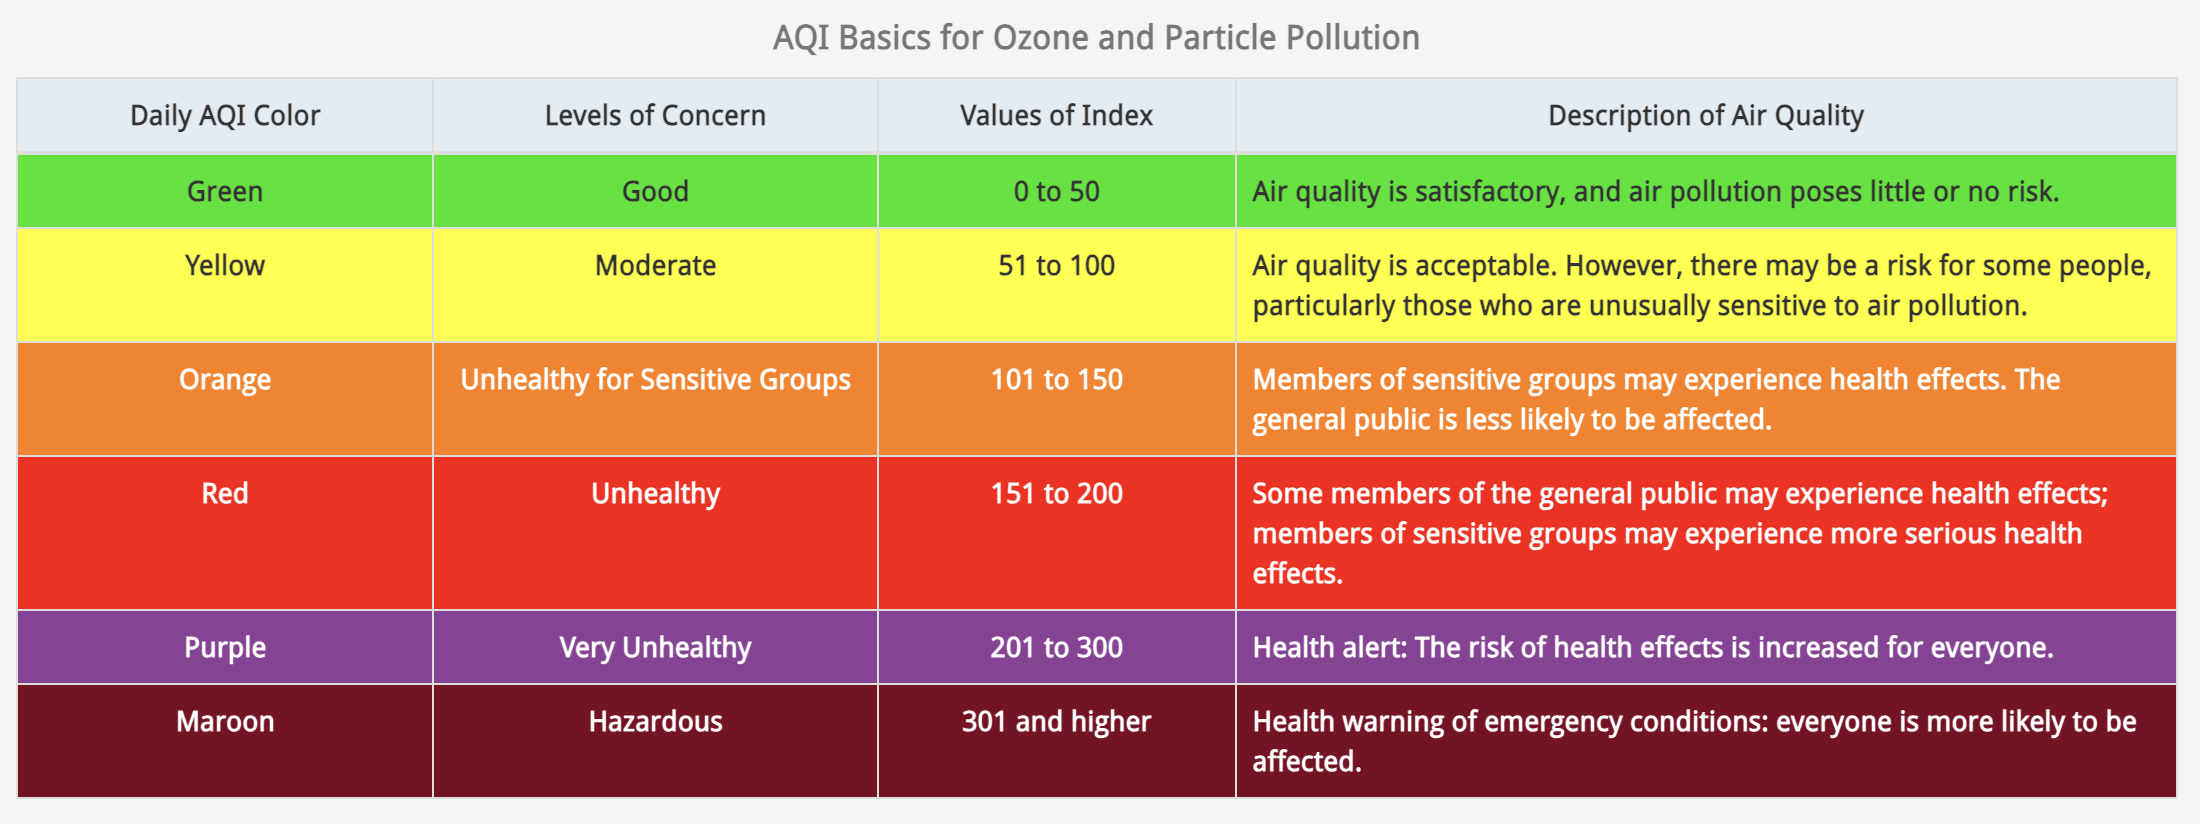 The index: Green (good), Yellow (Moderate), Orange (Unhealthy for Sensitive Groups), Red (Unhealthy), Purple (Very Unhealthy), Maroon (Hazardous)